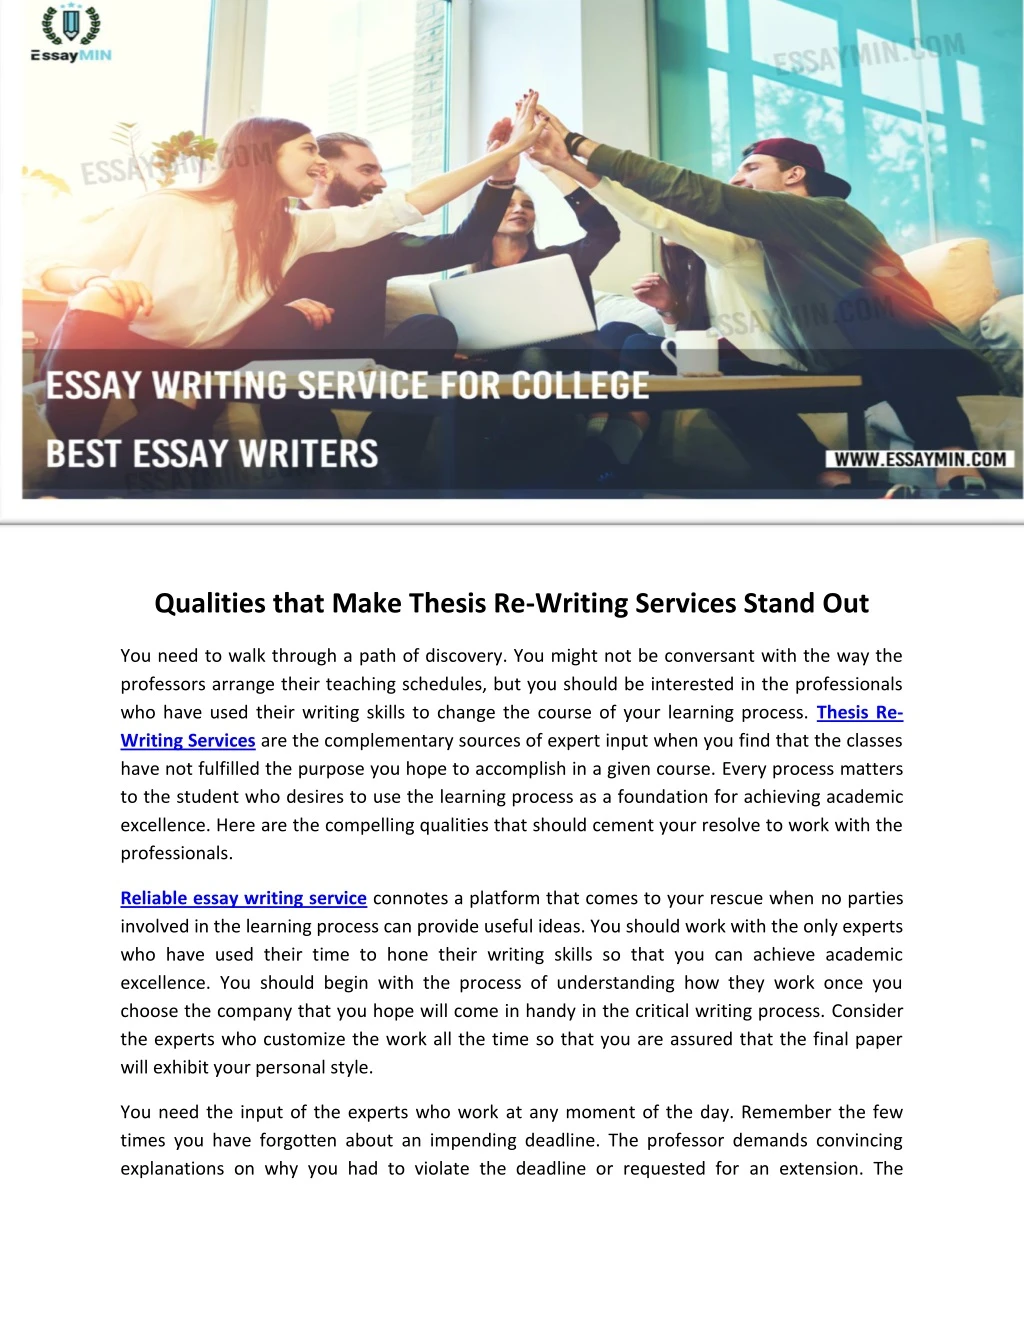 qualities that make thesis re writing services